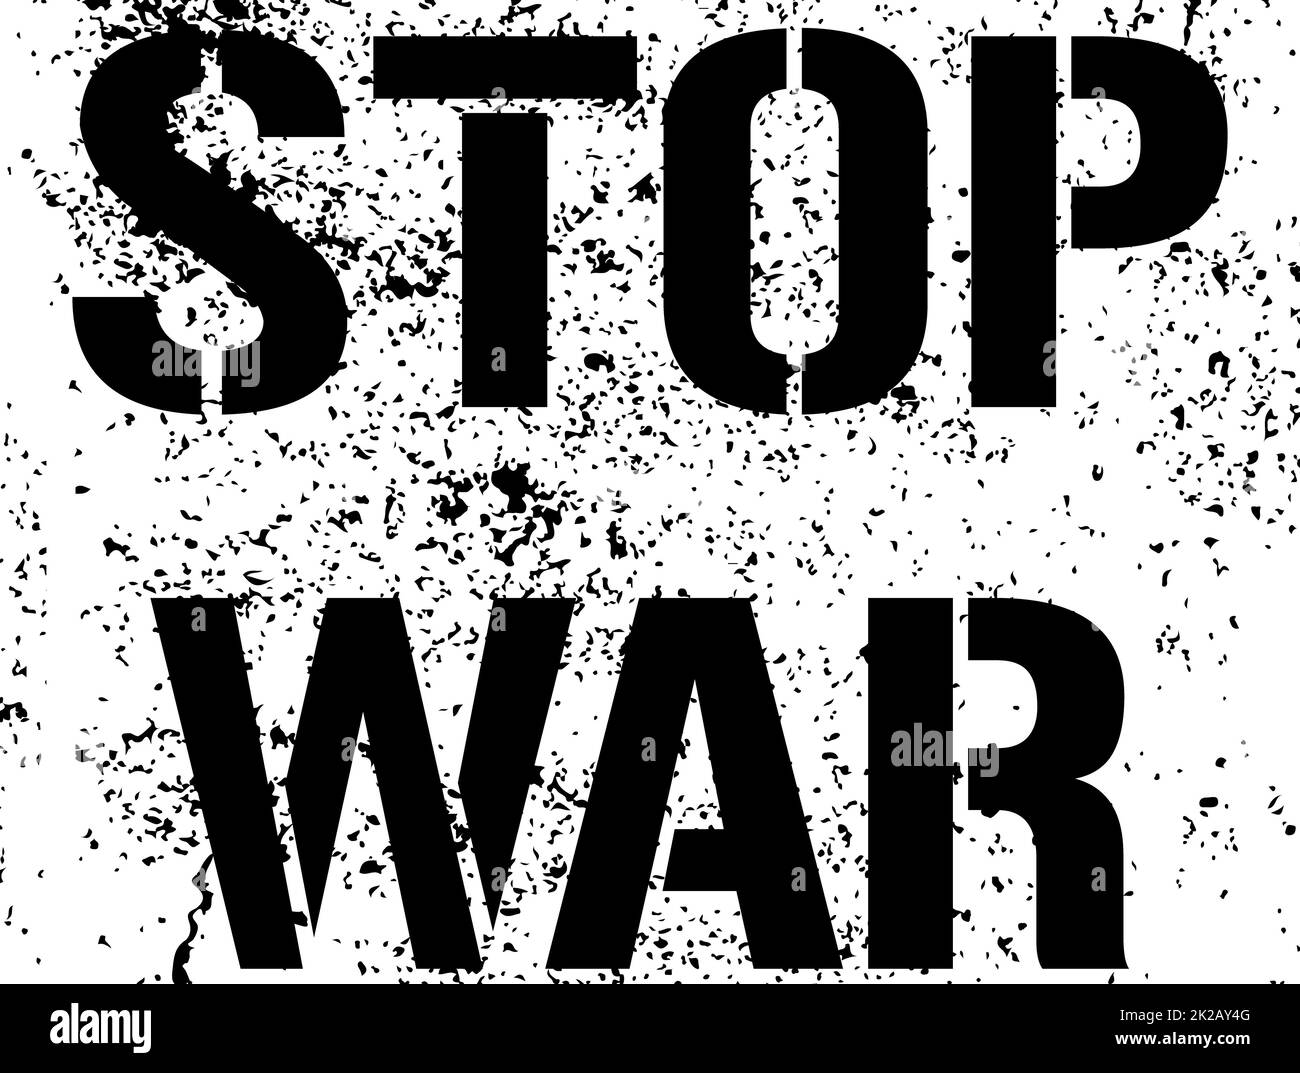 Stop the war - grunge text. Graffiti paint protest sign. A call to stop the war in the world. The armed conflict in Ukraine must be stopped. Stencil - vector illustration. Black peace scratch message. Stock Photo